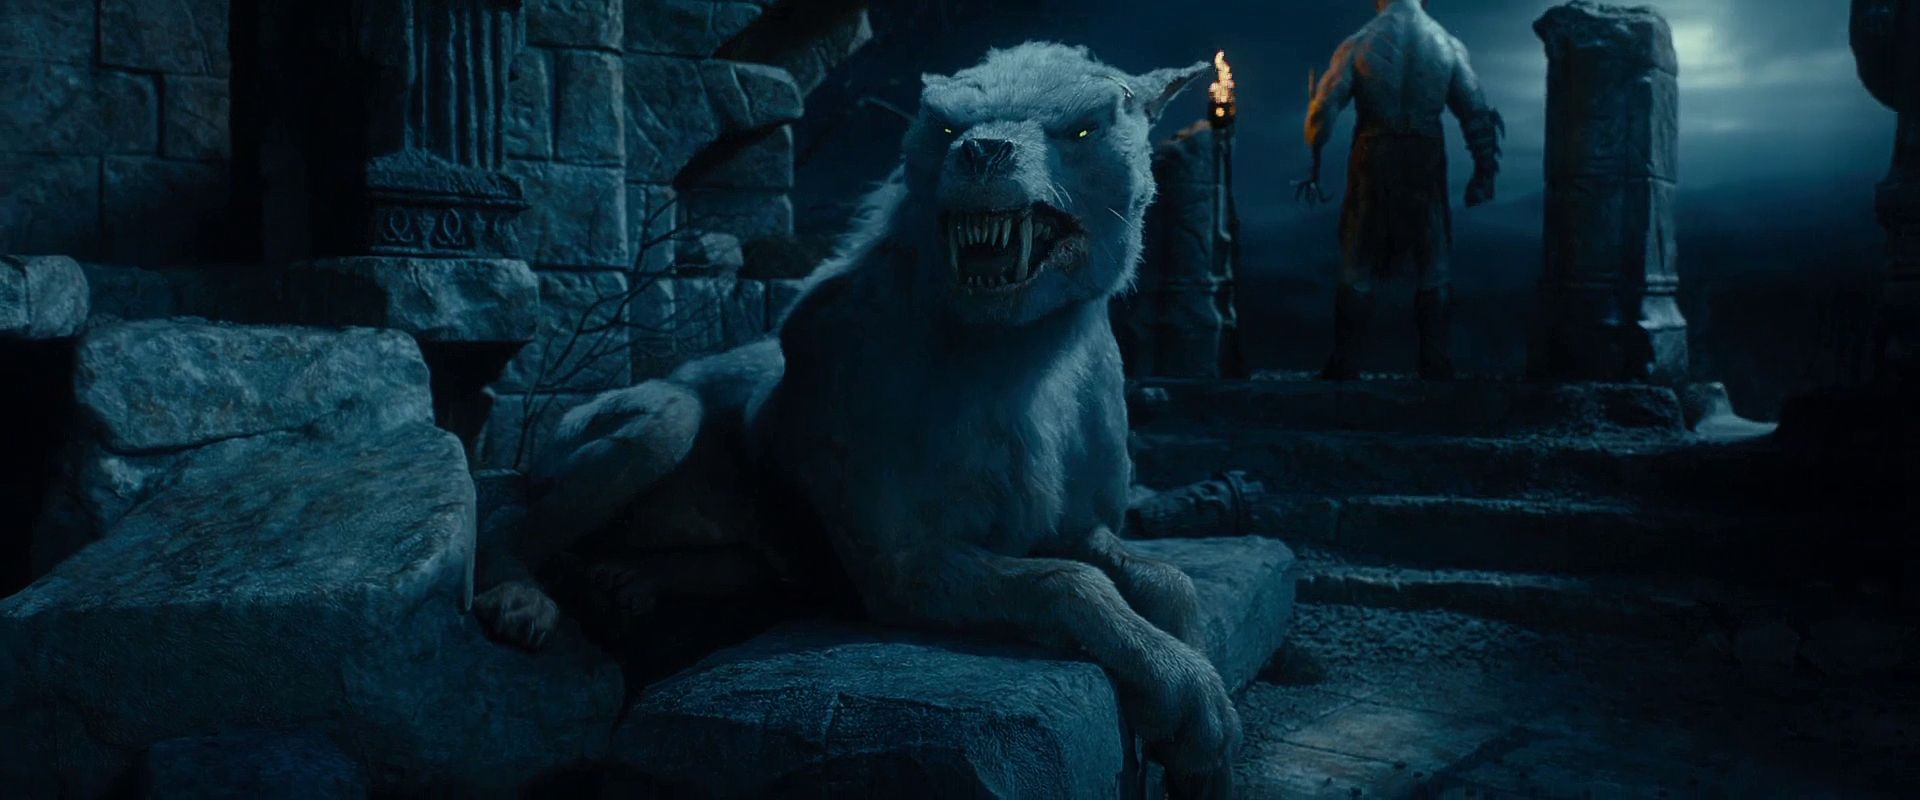 The Warg Matriarch Was Azog's Personal Warg Steed, And The Mother Of The Gundabad Wargs. The Matriarch Is Non Canonical As Sh. The Hobbit, Lord Of The Rings, Lotr